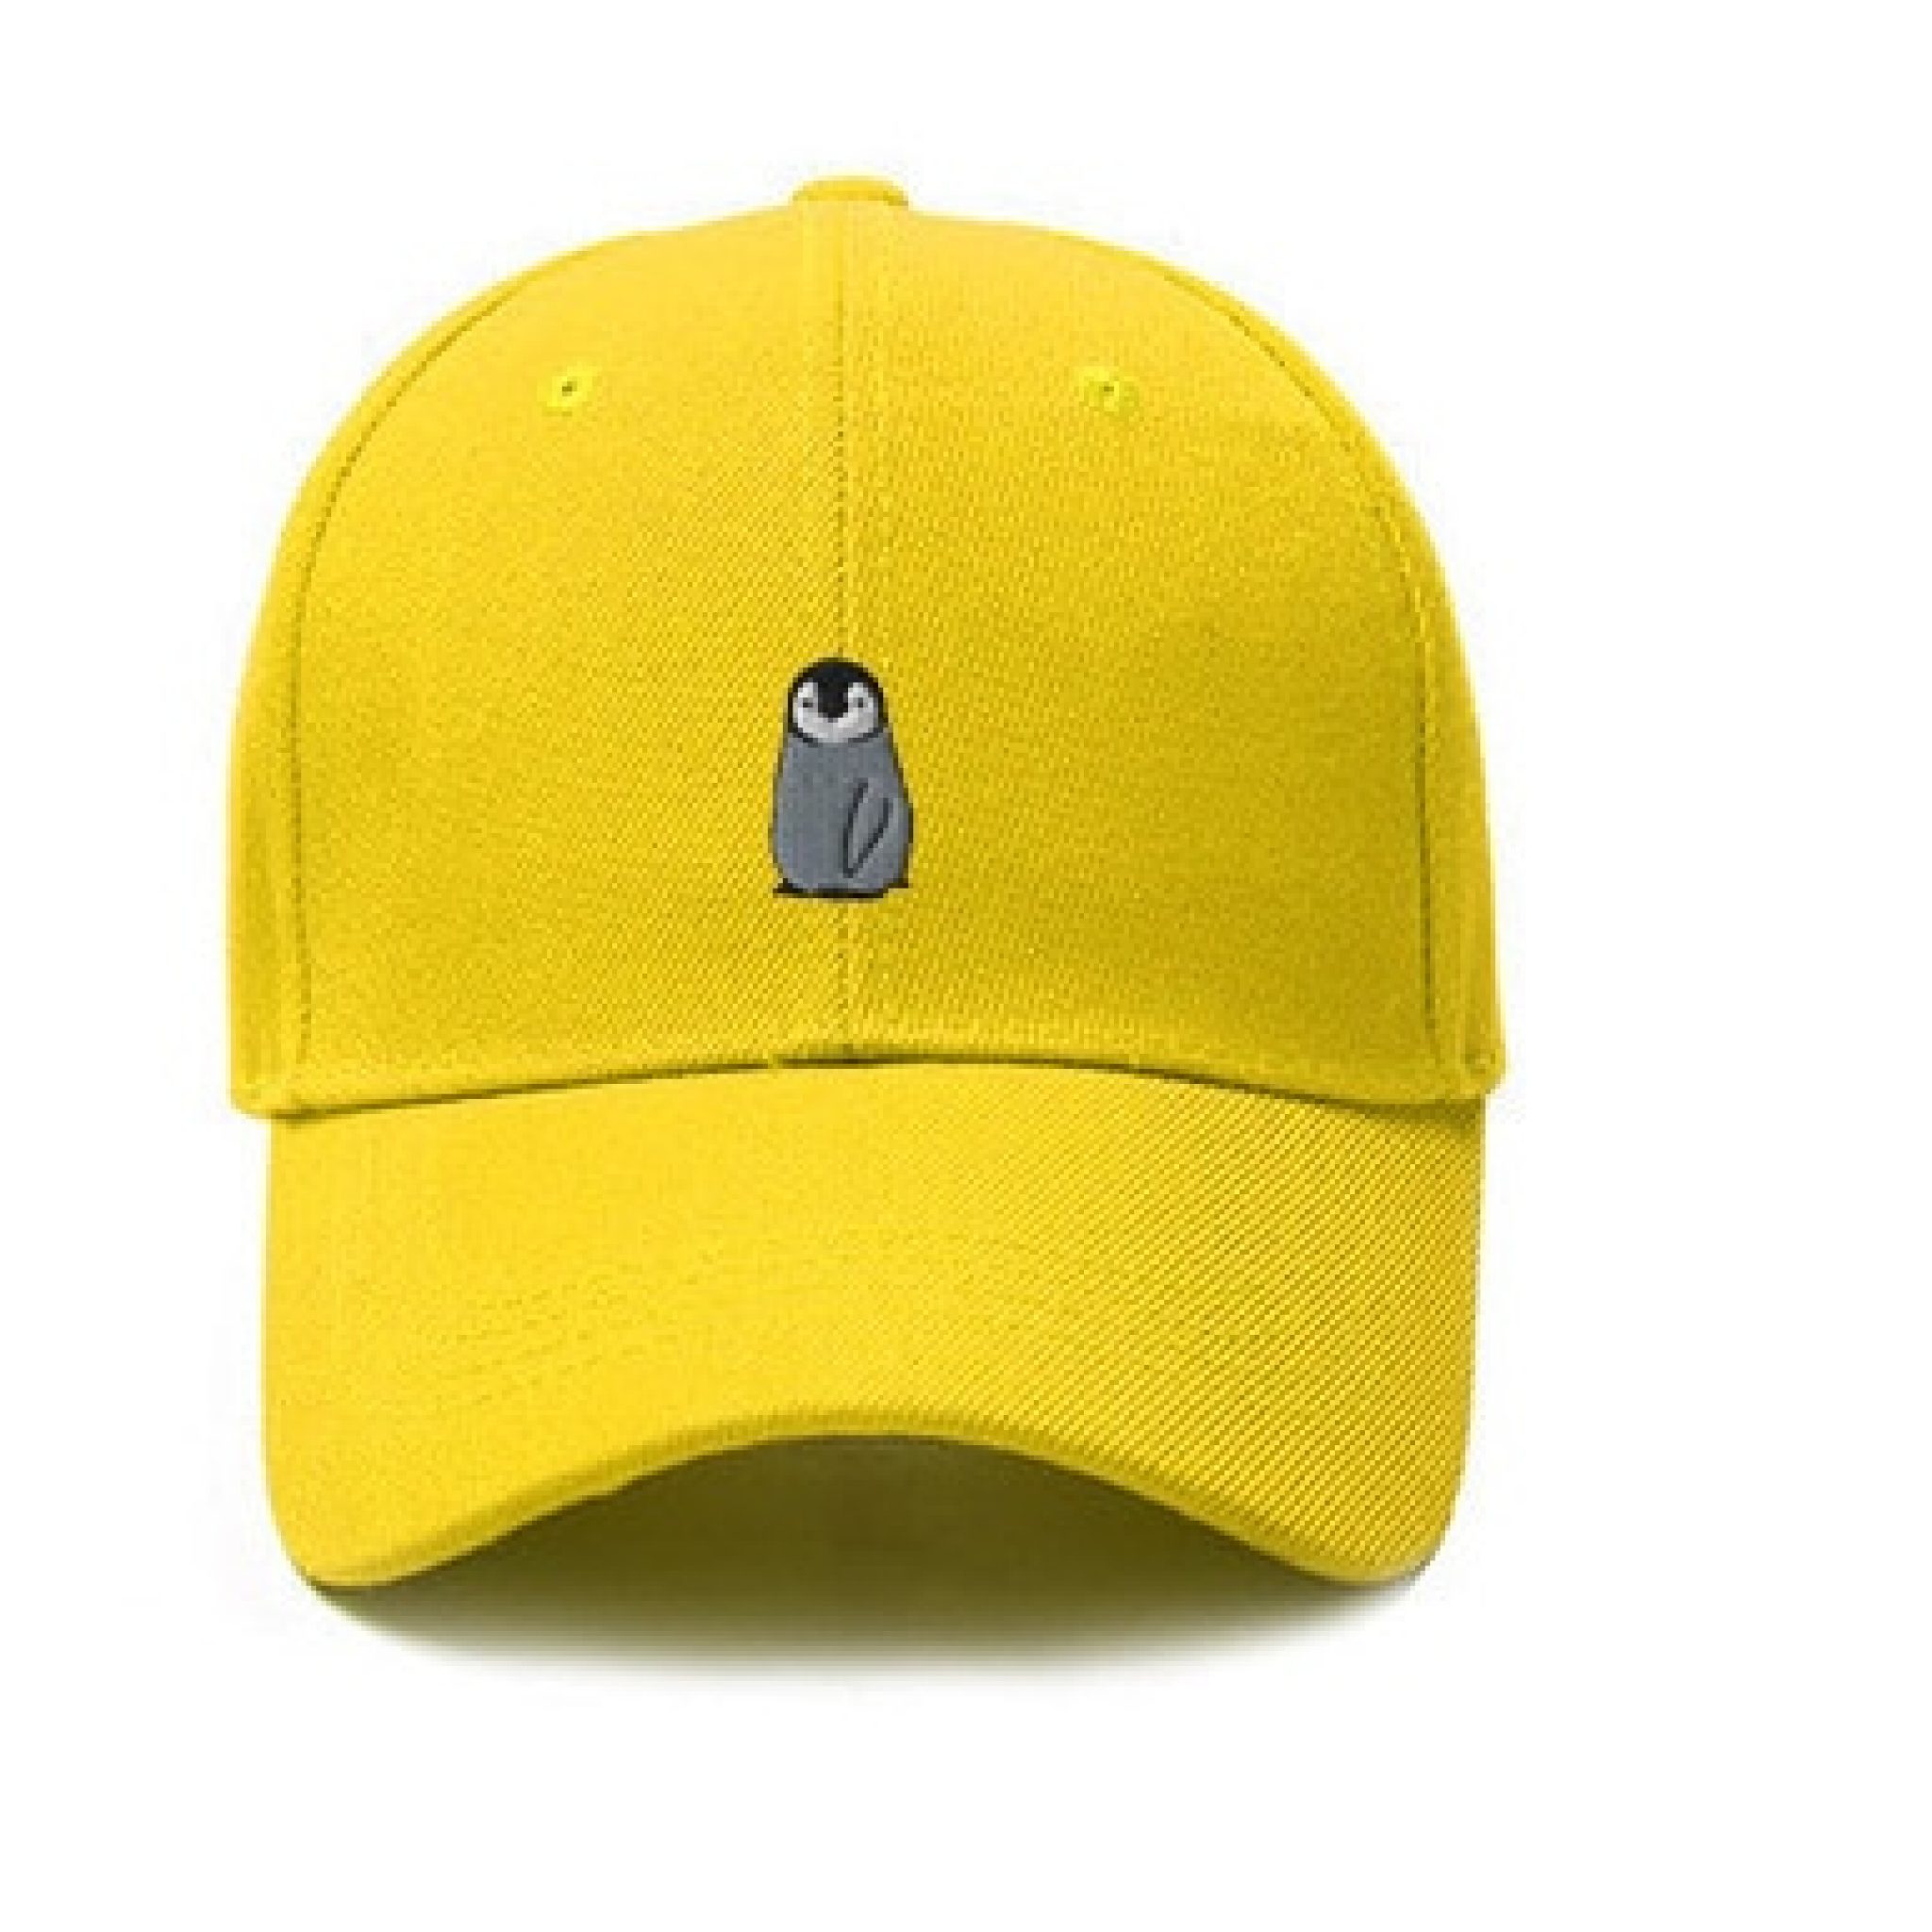 Penguin Hat : Elevate Your Style with Laid-Back Flair